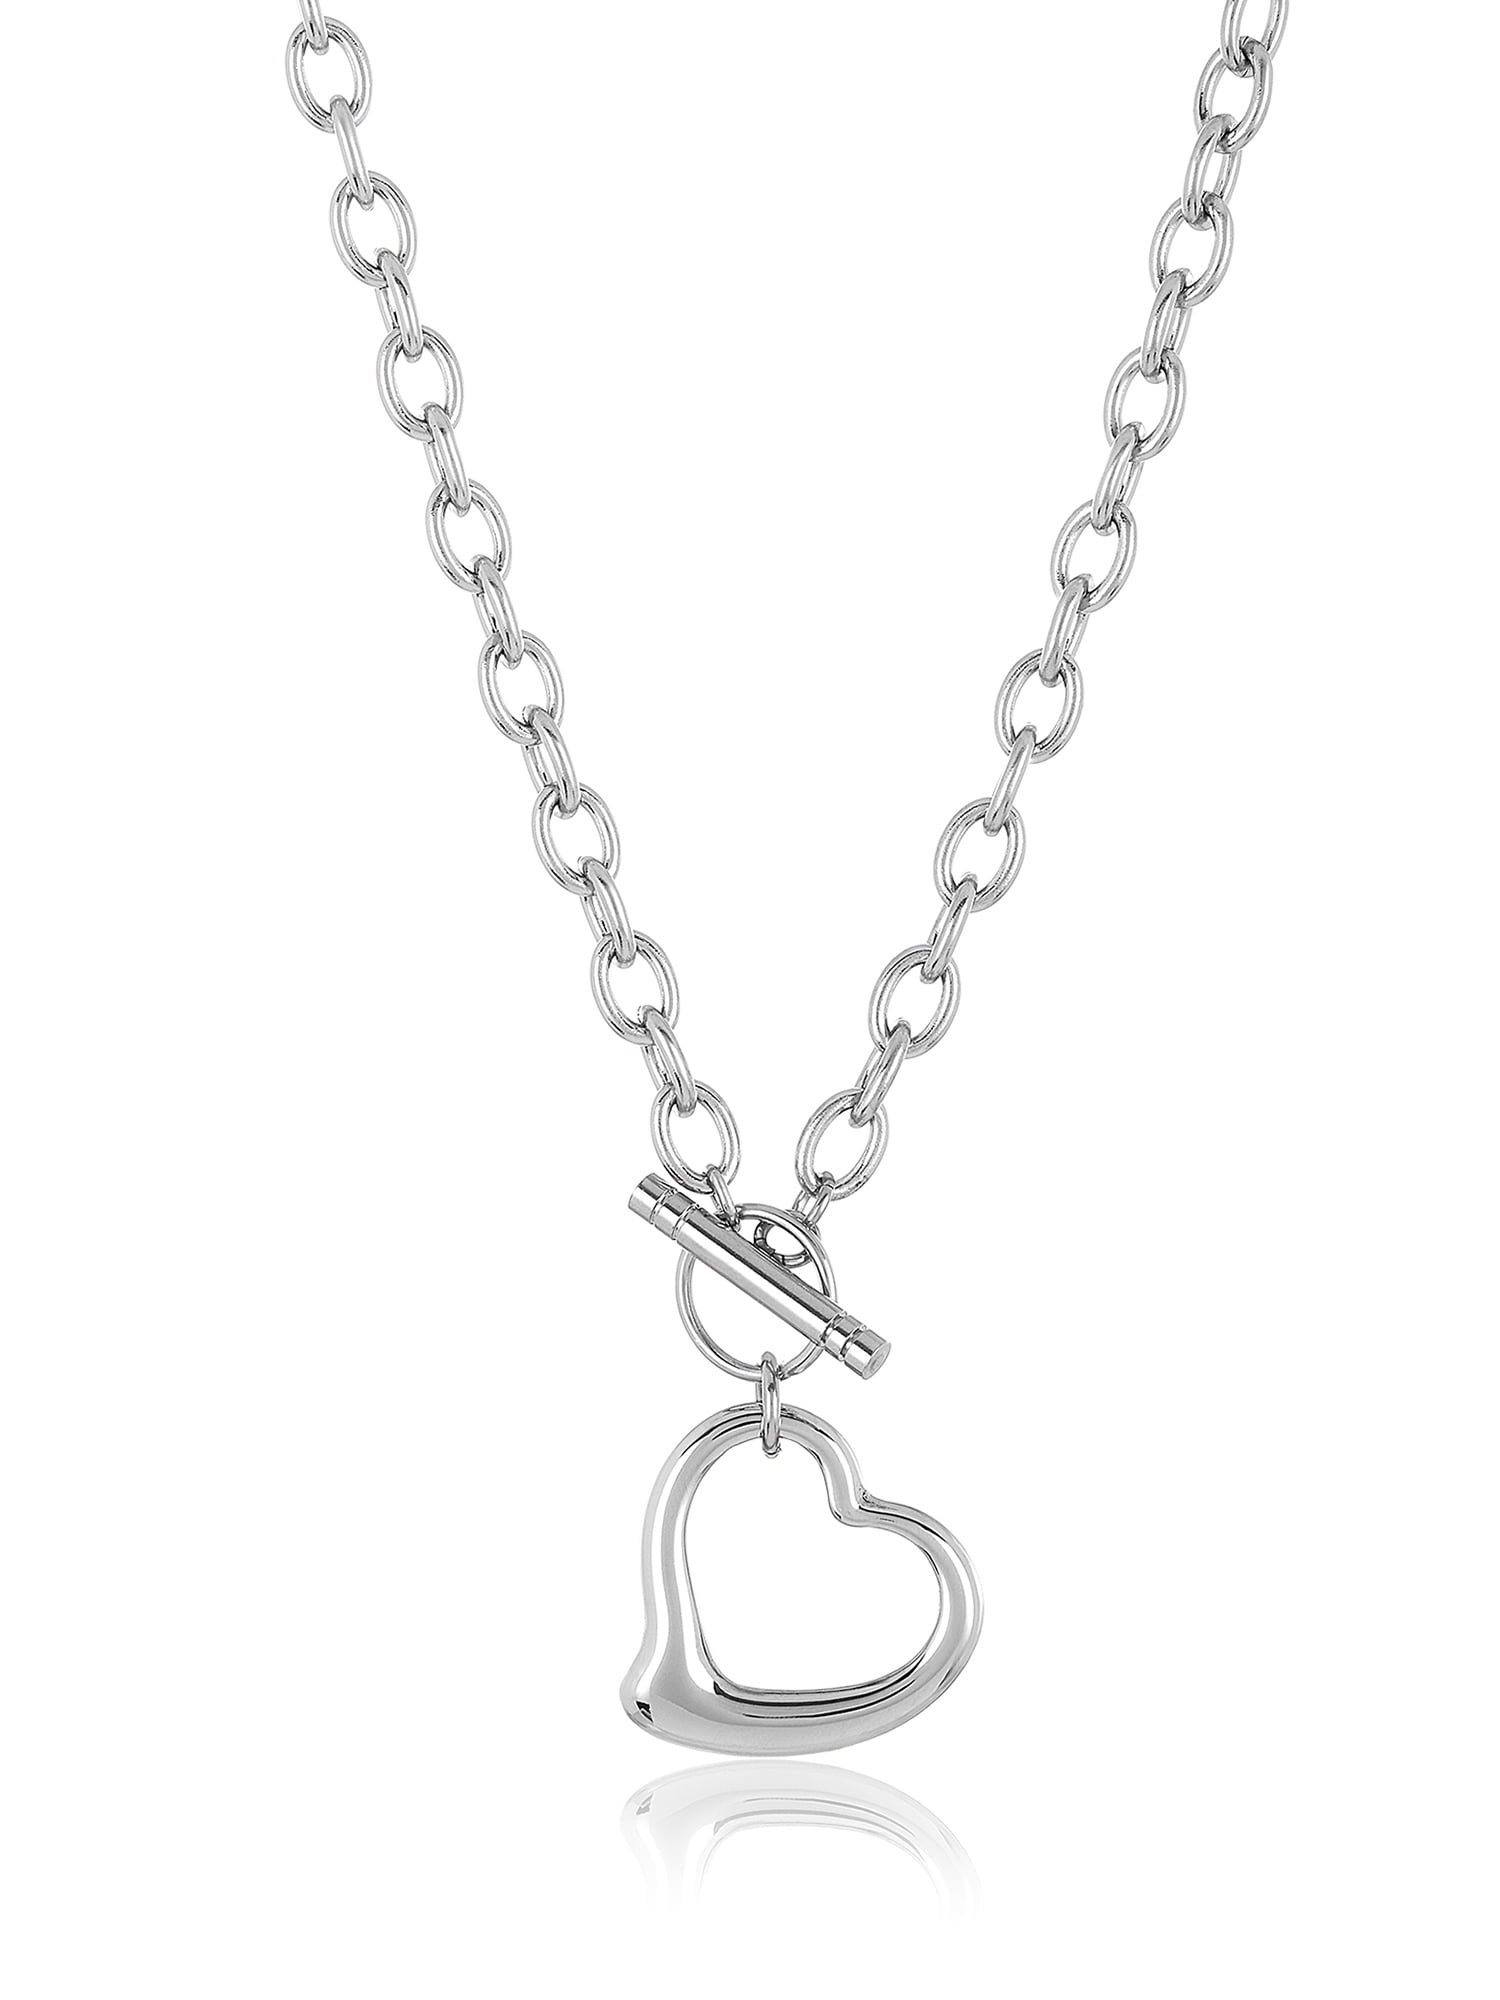 Coastal Jewelry - Stainless Steel Cable Chain Open Heart Toggle ...